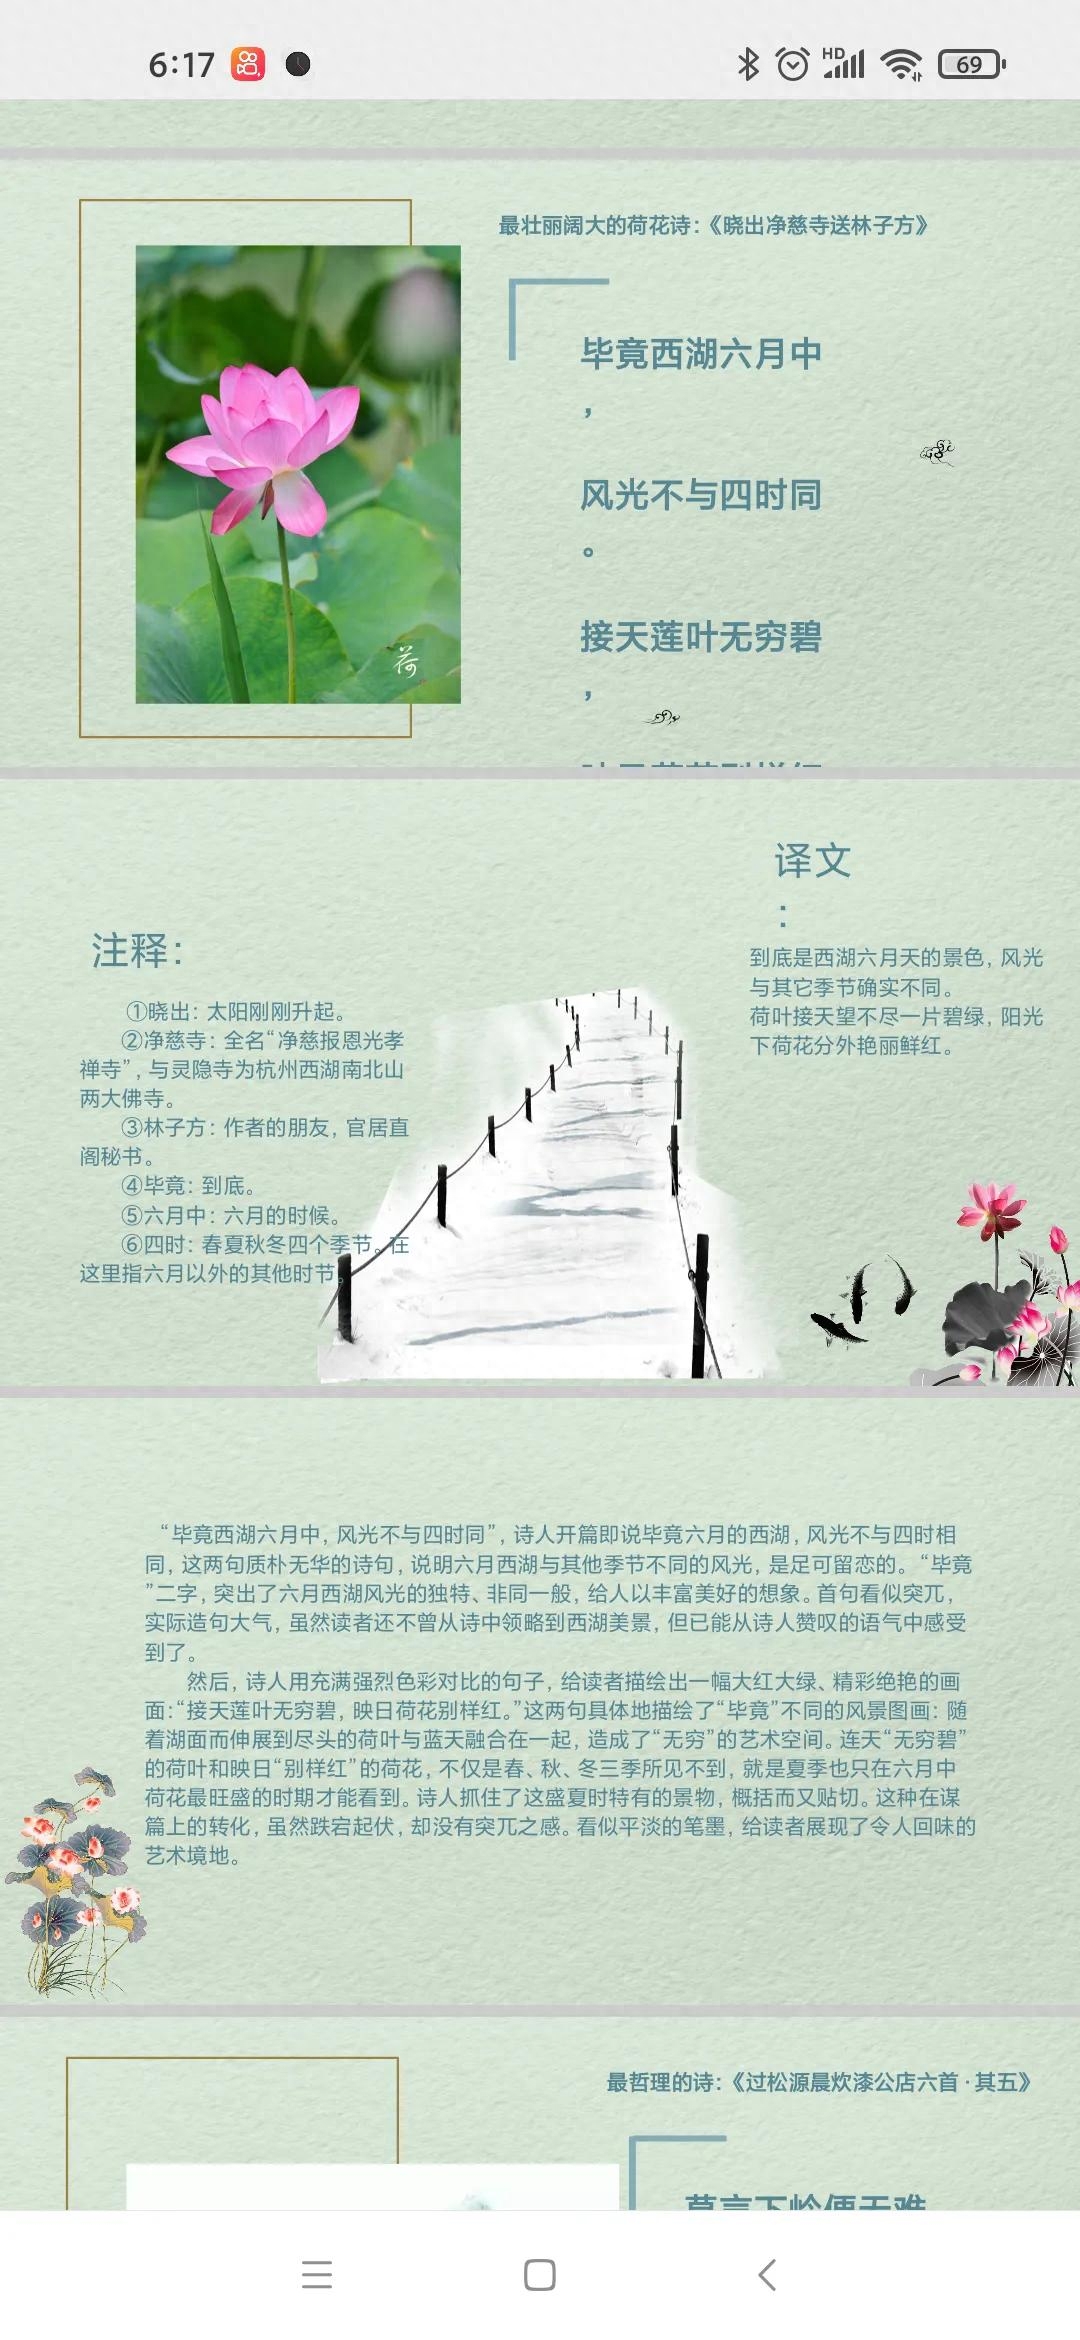 "Poetic and Picturesque PPT" (21) "Lotus Flowers Are Differently Red in the Sun - 11 Classic Poems by Yang Wanli"